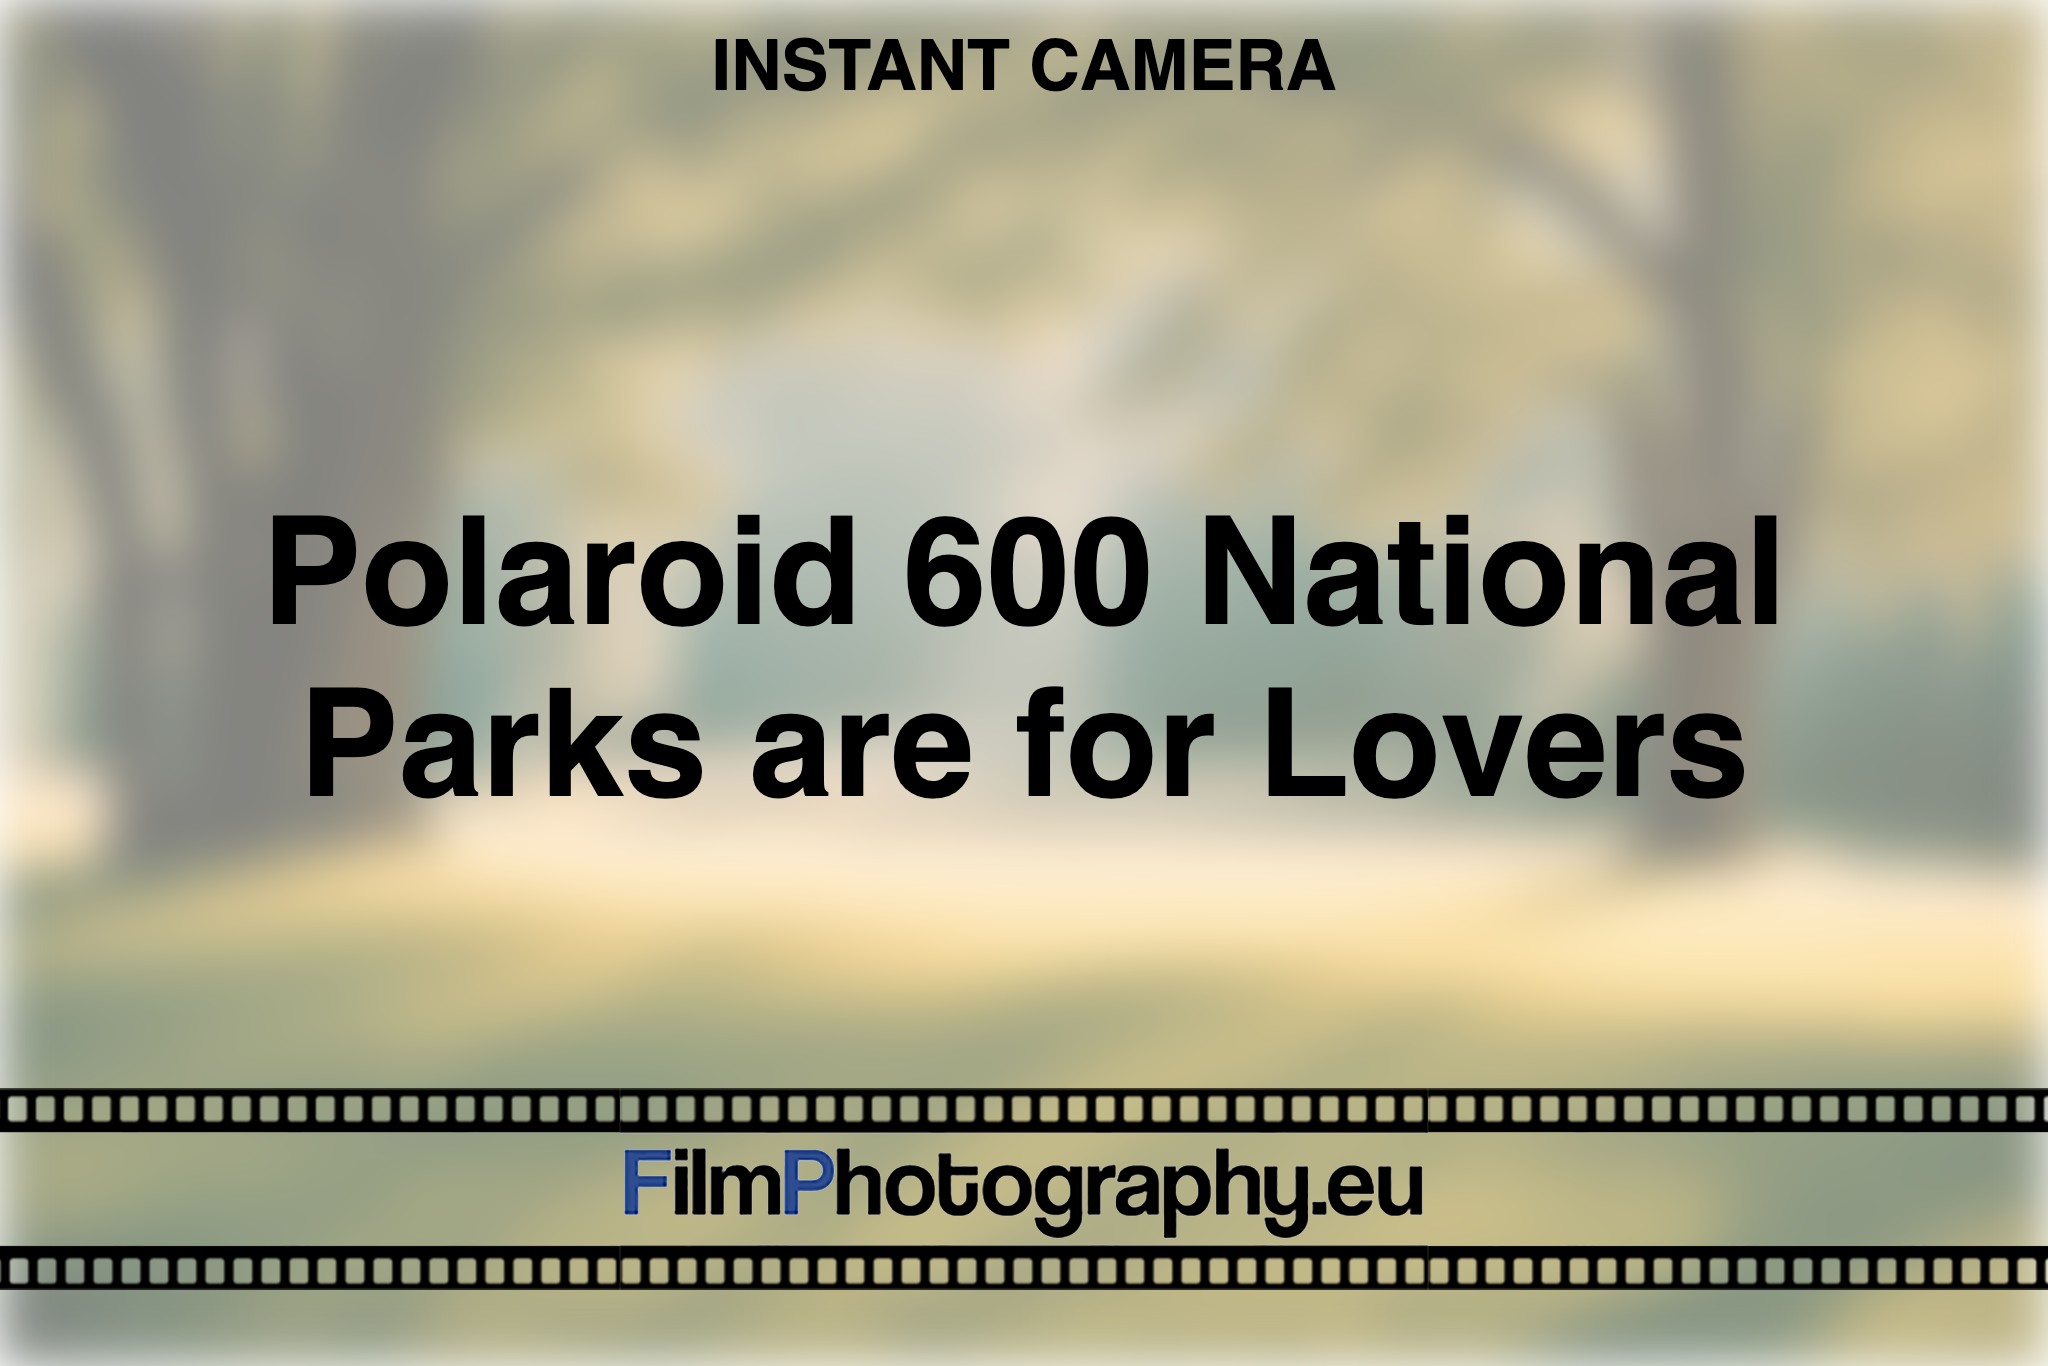 polaroid-600-national-parks-are-for-lovers-instant-camera-bnv